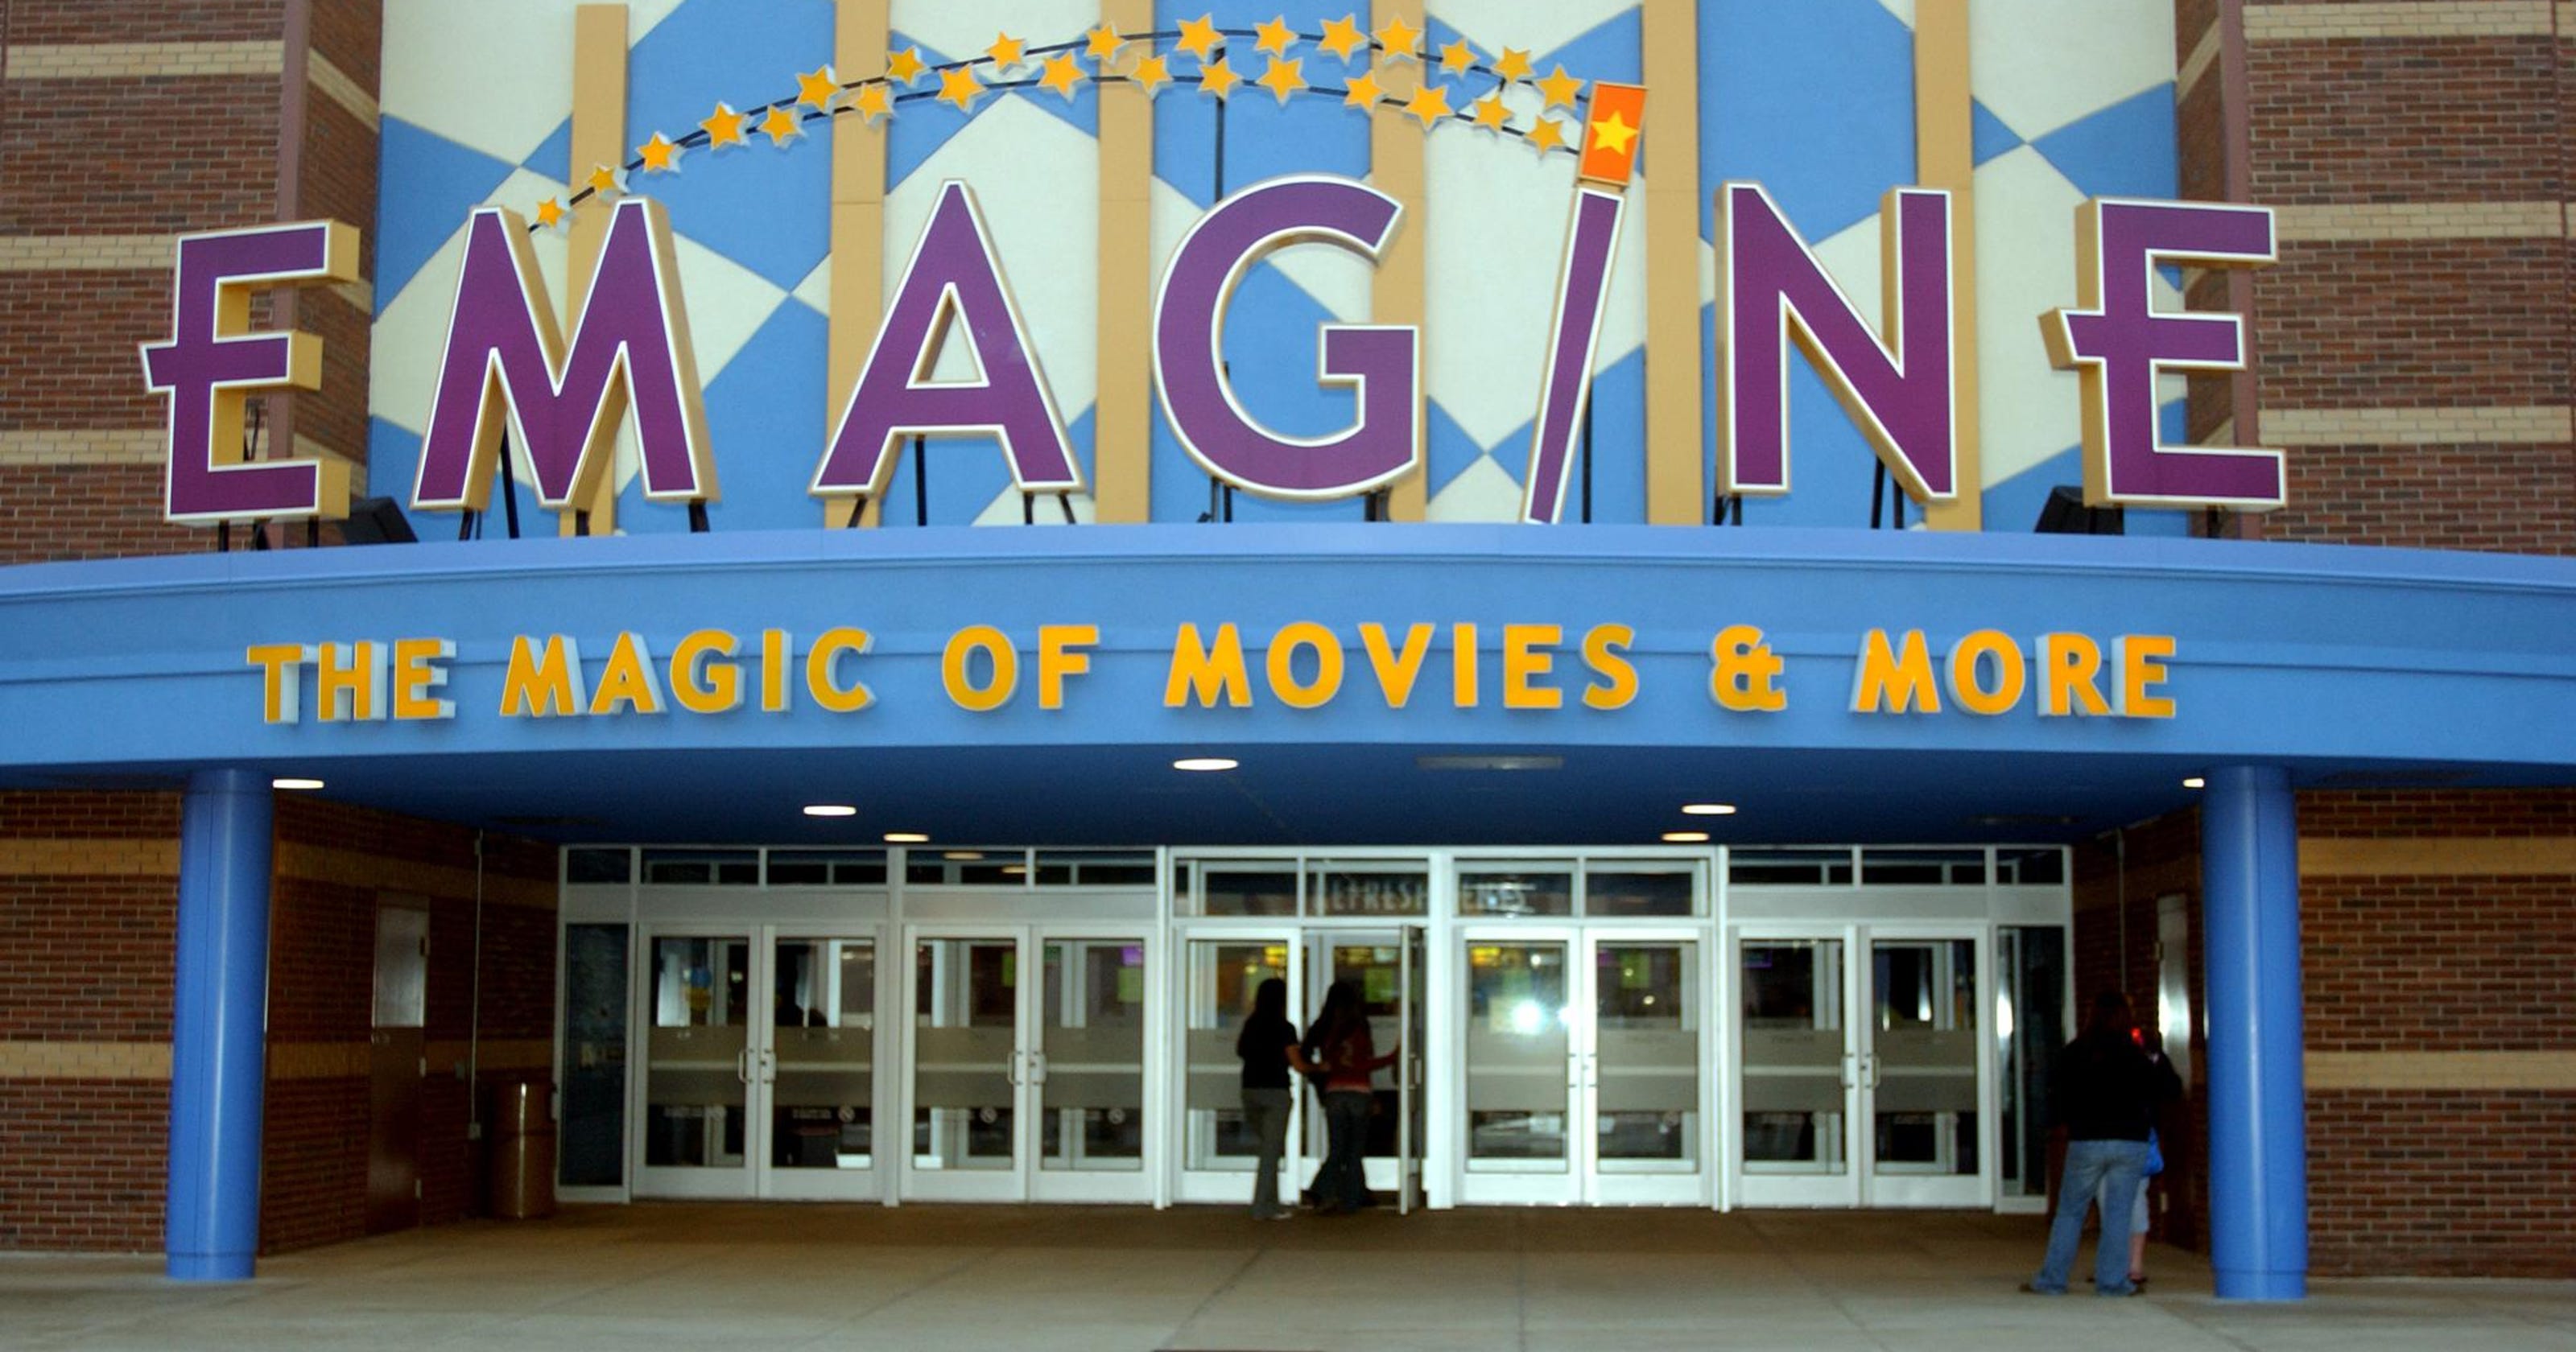 Emagine offers 2 tickets to summer kids movies